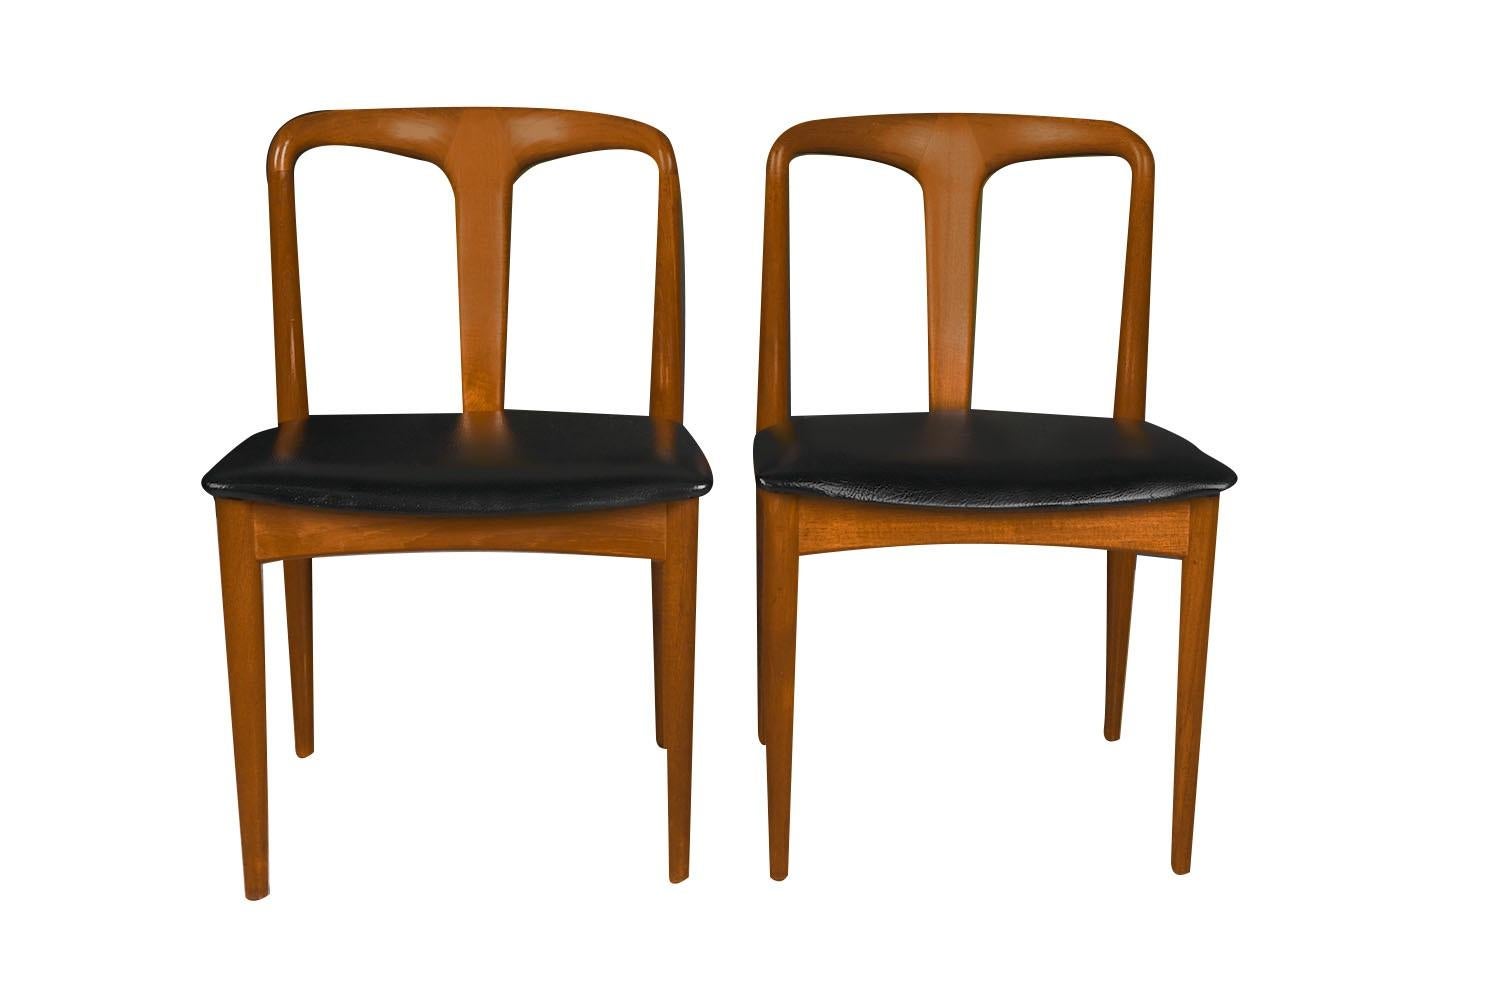 A beautiful pair of teak Danish modern ‘Juliane’ dining chairs by famous designer Johannes Andersen for Uldum Møbelfabrik, made in Denmark, circa 1960s. Superbly crafted in rich solid teak frames, remarkably notable are the carved sculpted backrests